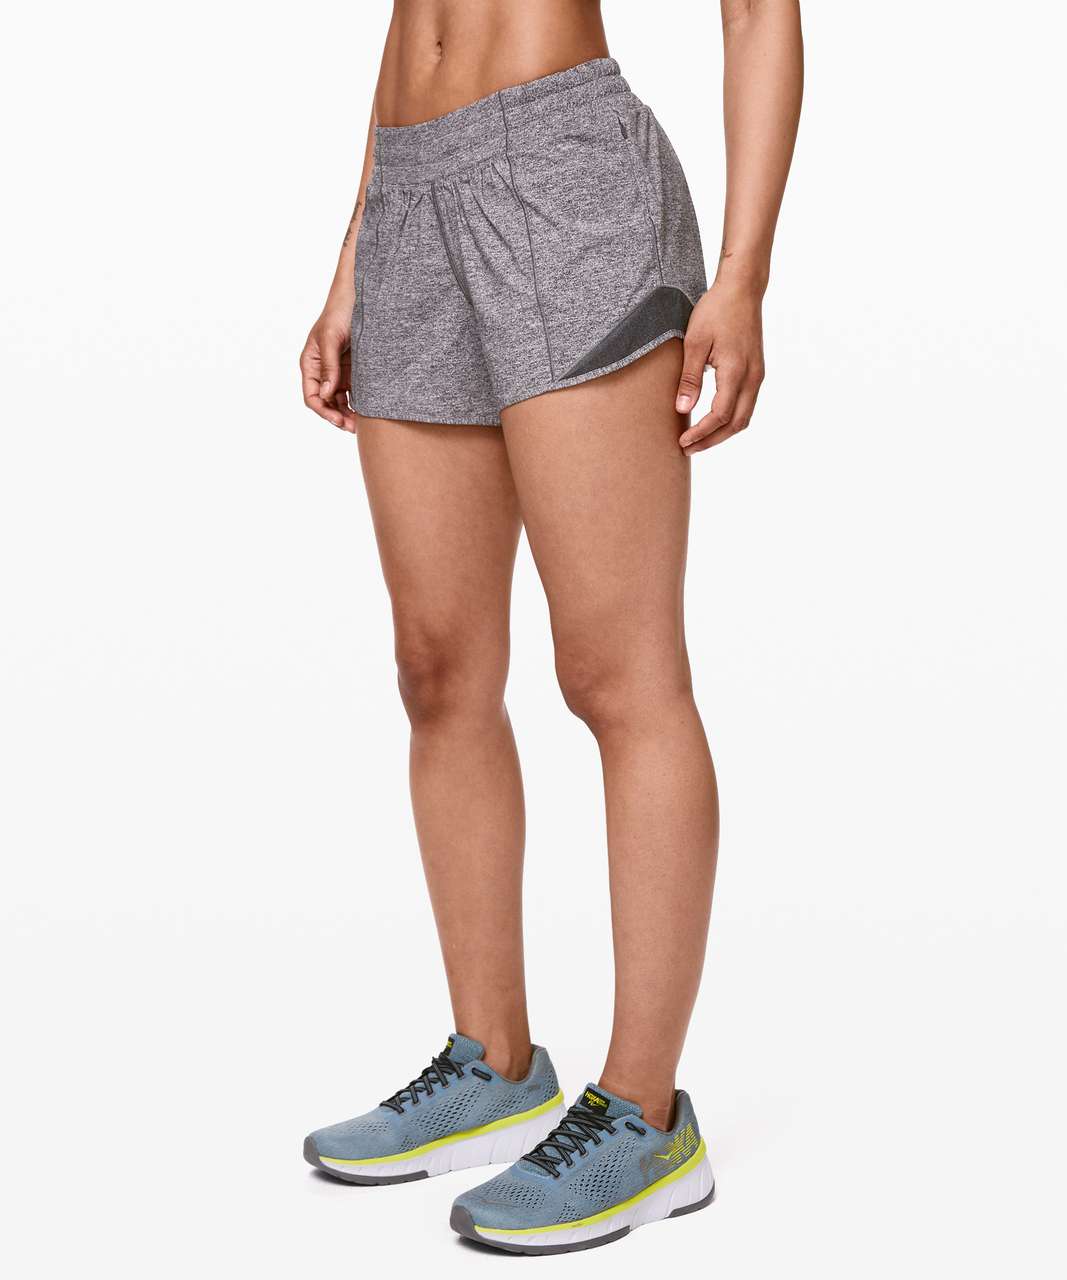 lululemon Speed Up Mid-Rise Short 4 Lined in Heather Lux Multi